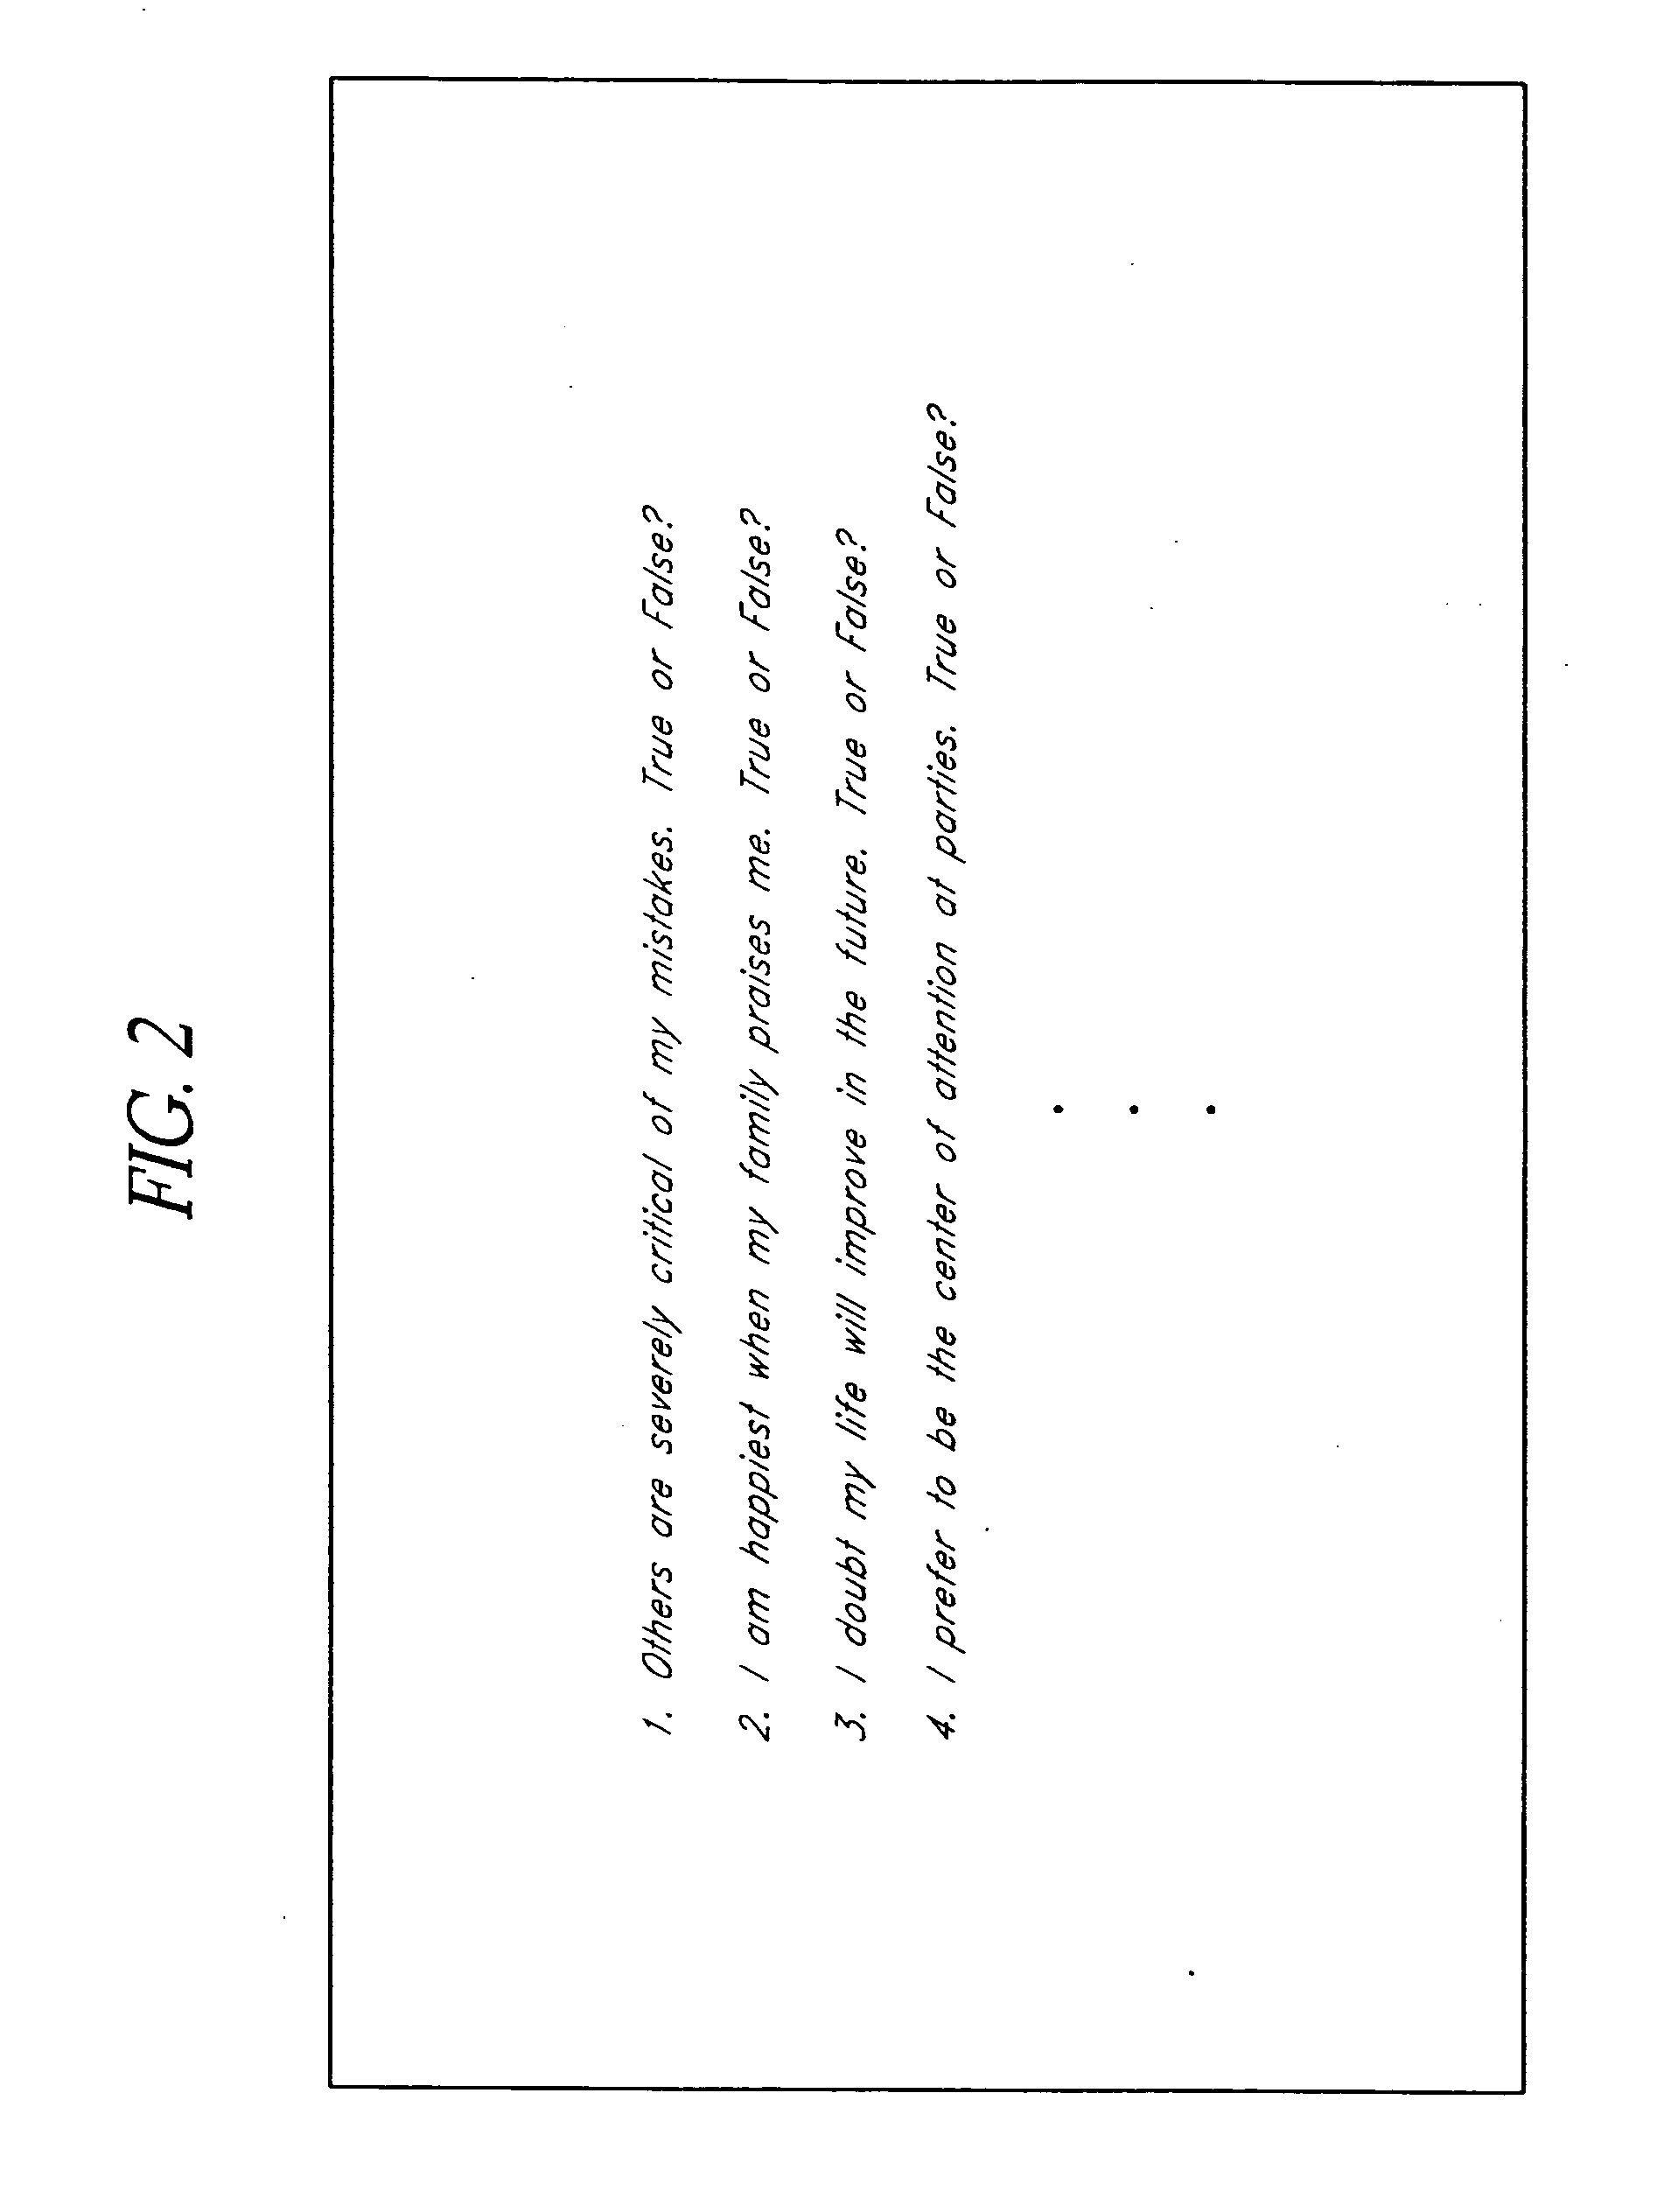 Automated protocol for determining psychiatric disability